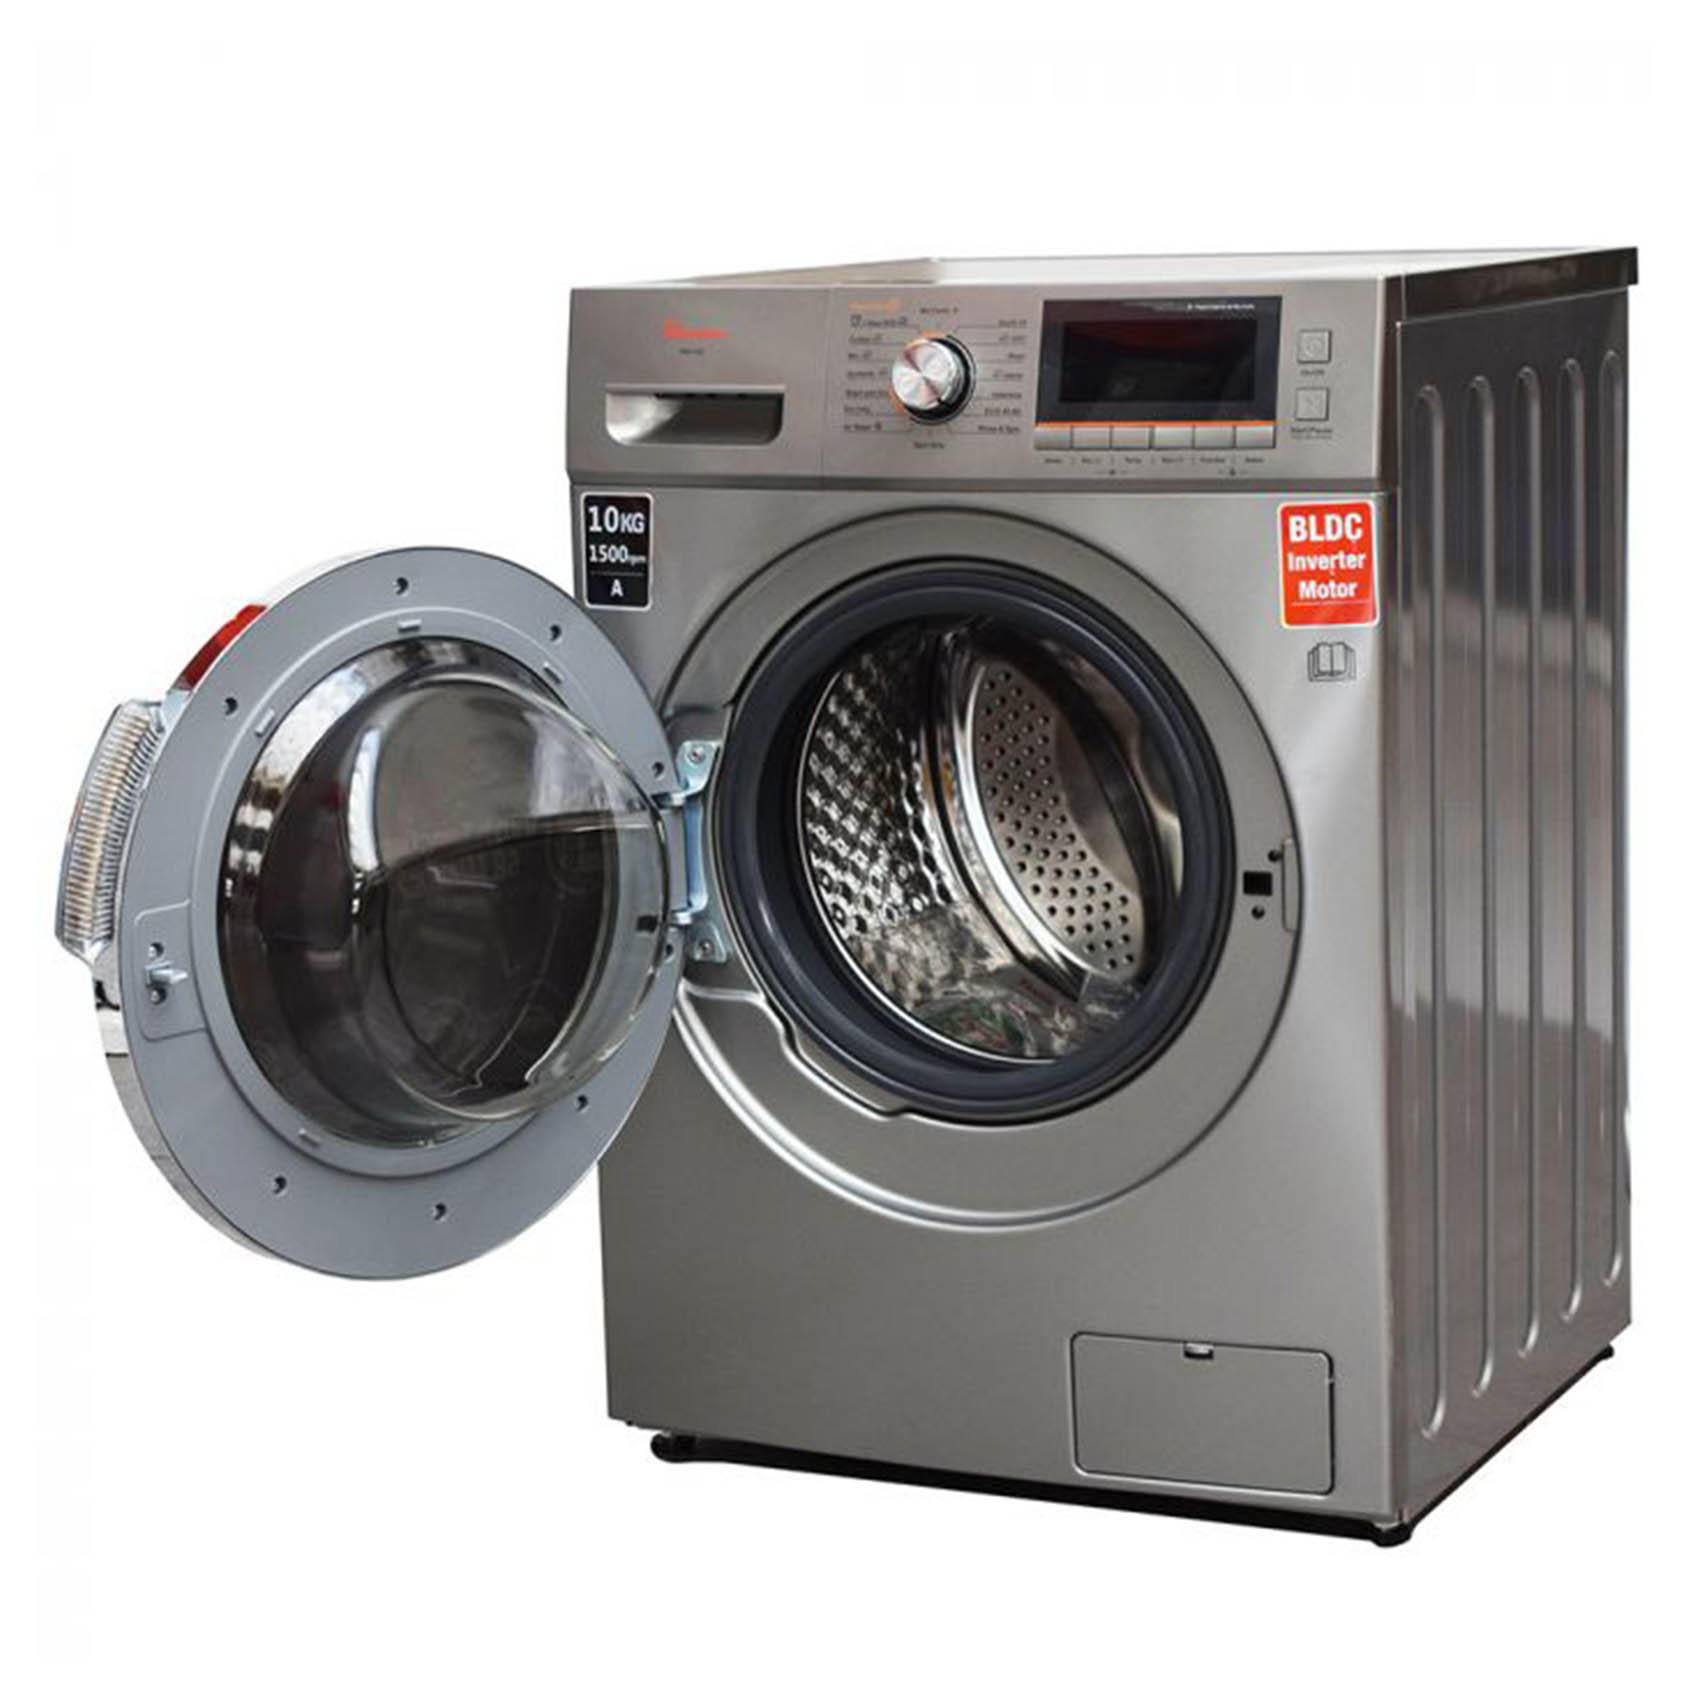 Ramtons Front Load Fully Automatic 10Kg Washer, 7Kg Dryer, Silver - Rw/160